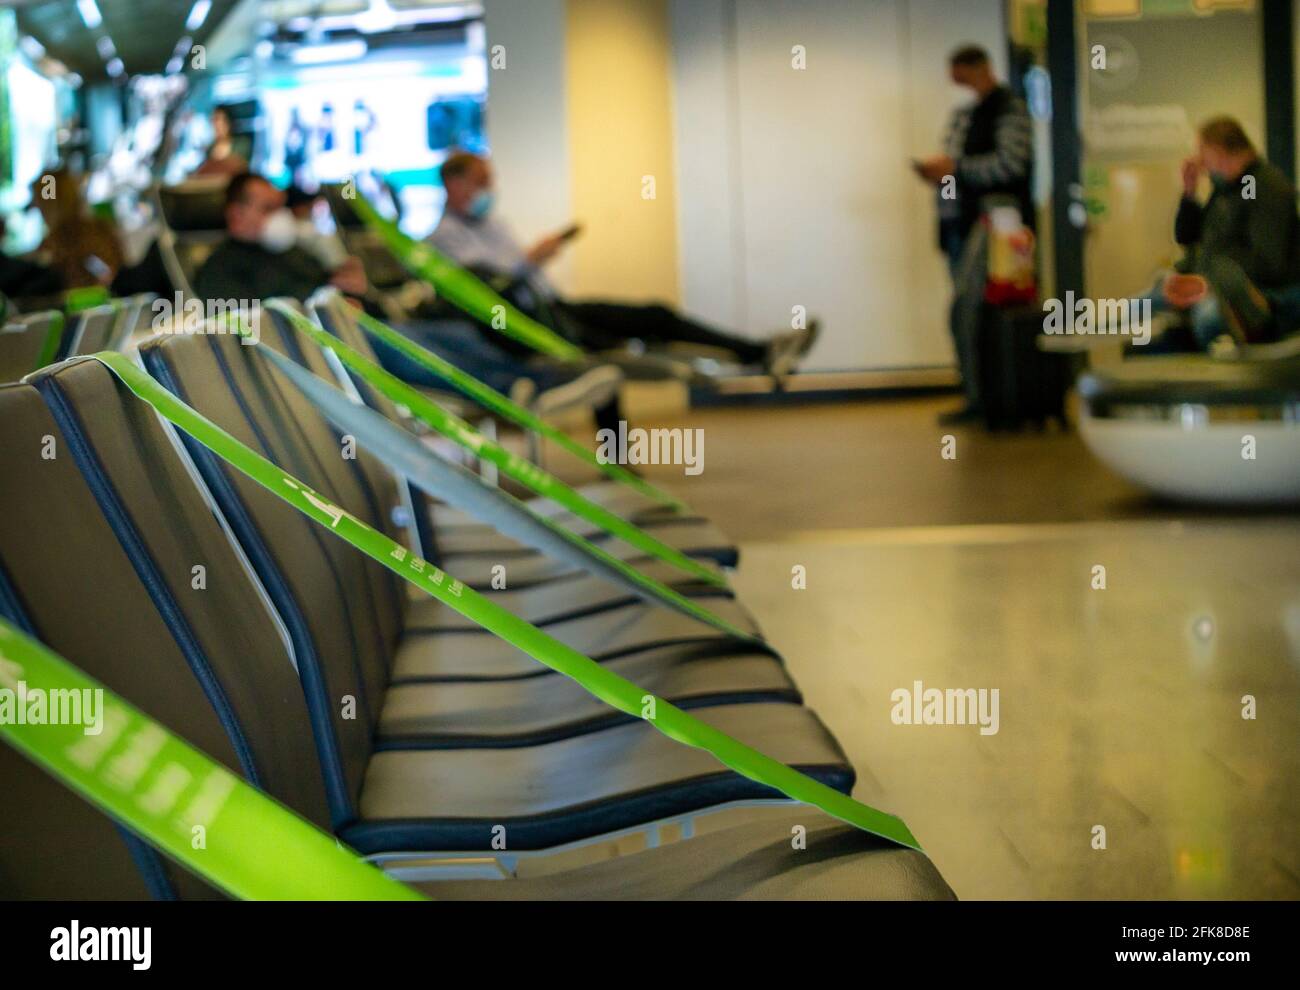 A row of black empty seats. Passengers in the transit zone of an airport, waiting in the sitting area, with distancing marked by green tape. Stock Photo